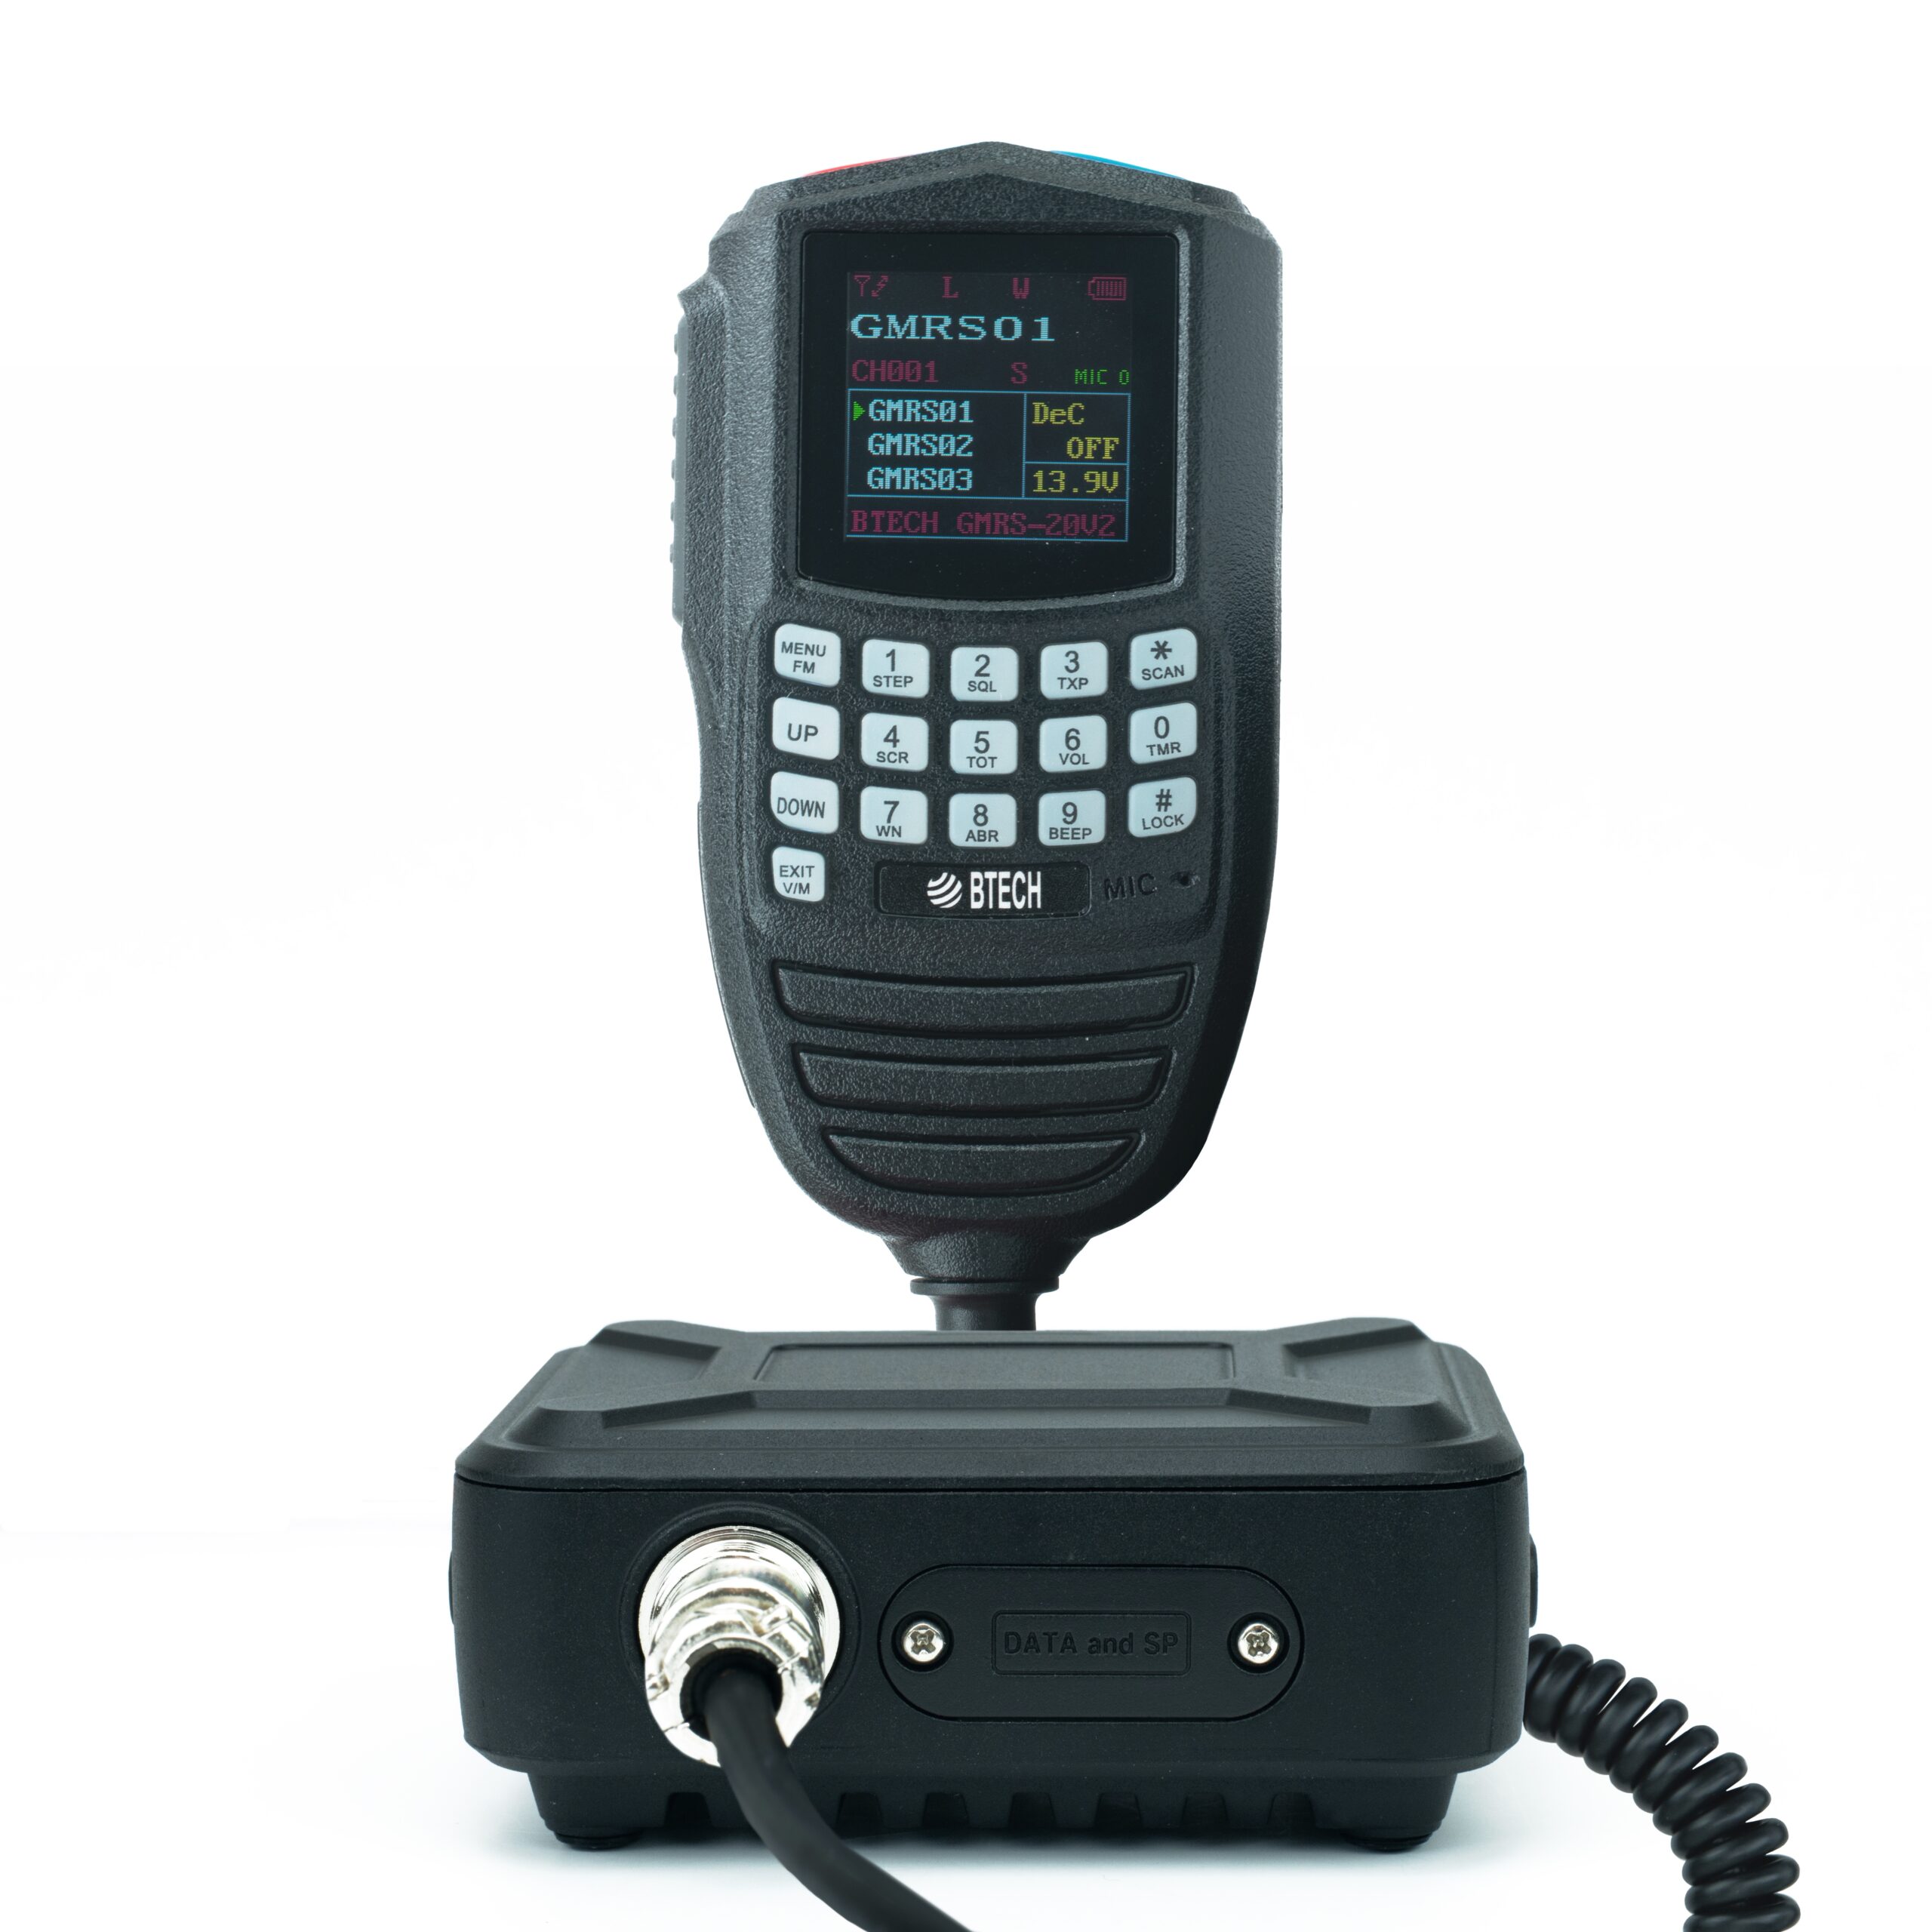 BTECH GMRS-20V2 20W IP67 GMRS Mobile Radio BaoFeng Radios